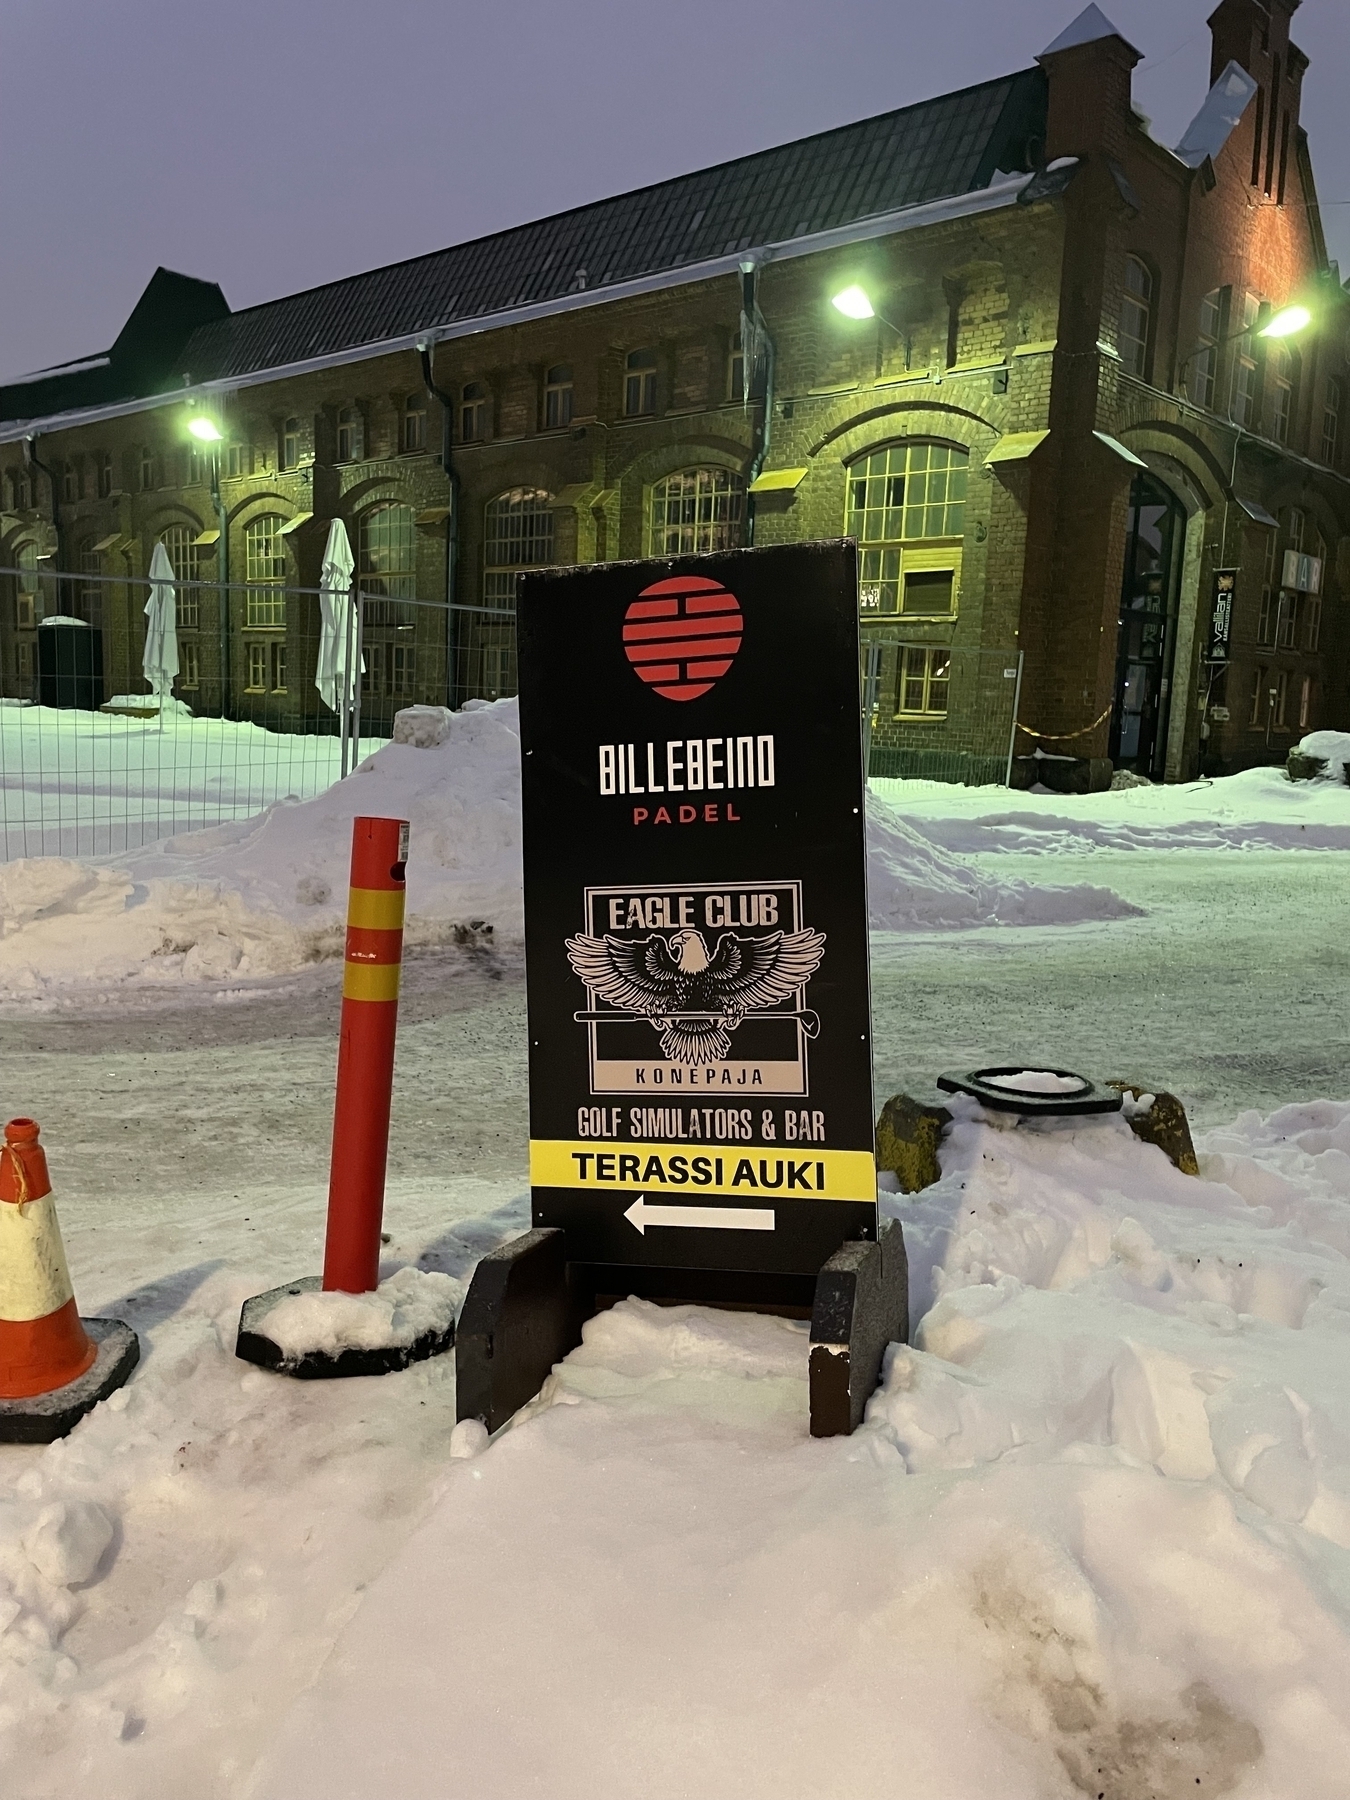 A sign saying “EAGLE CLUB Golf Simulators & pub. TERASSI AUKI”. The sign is standing in a pile of snow. 